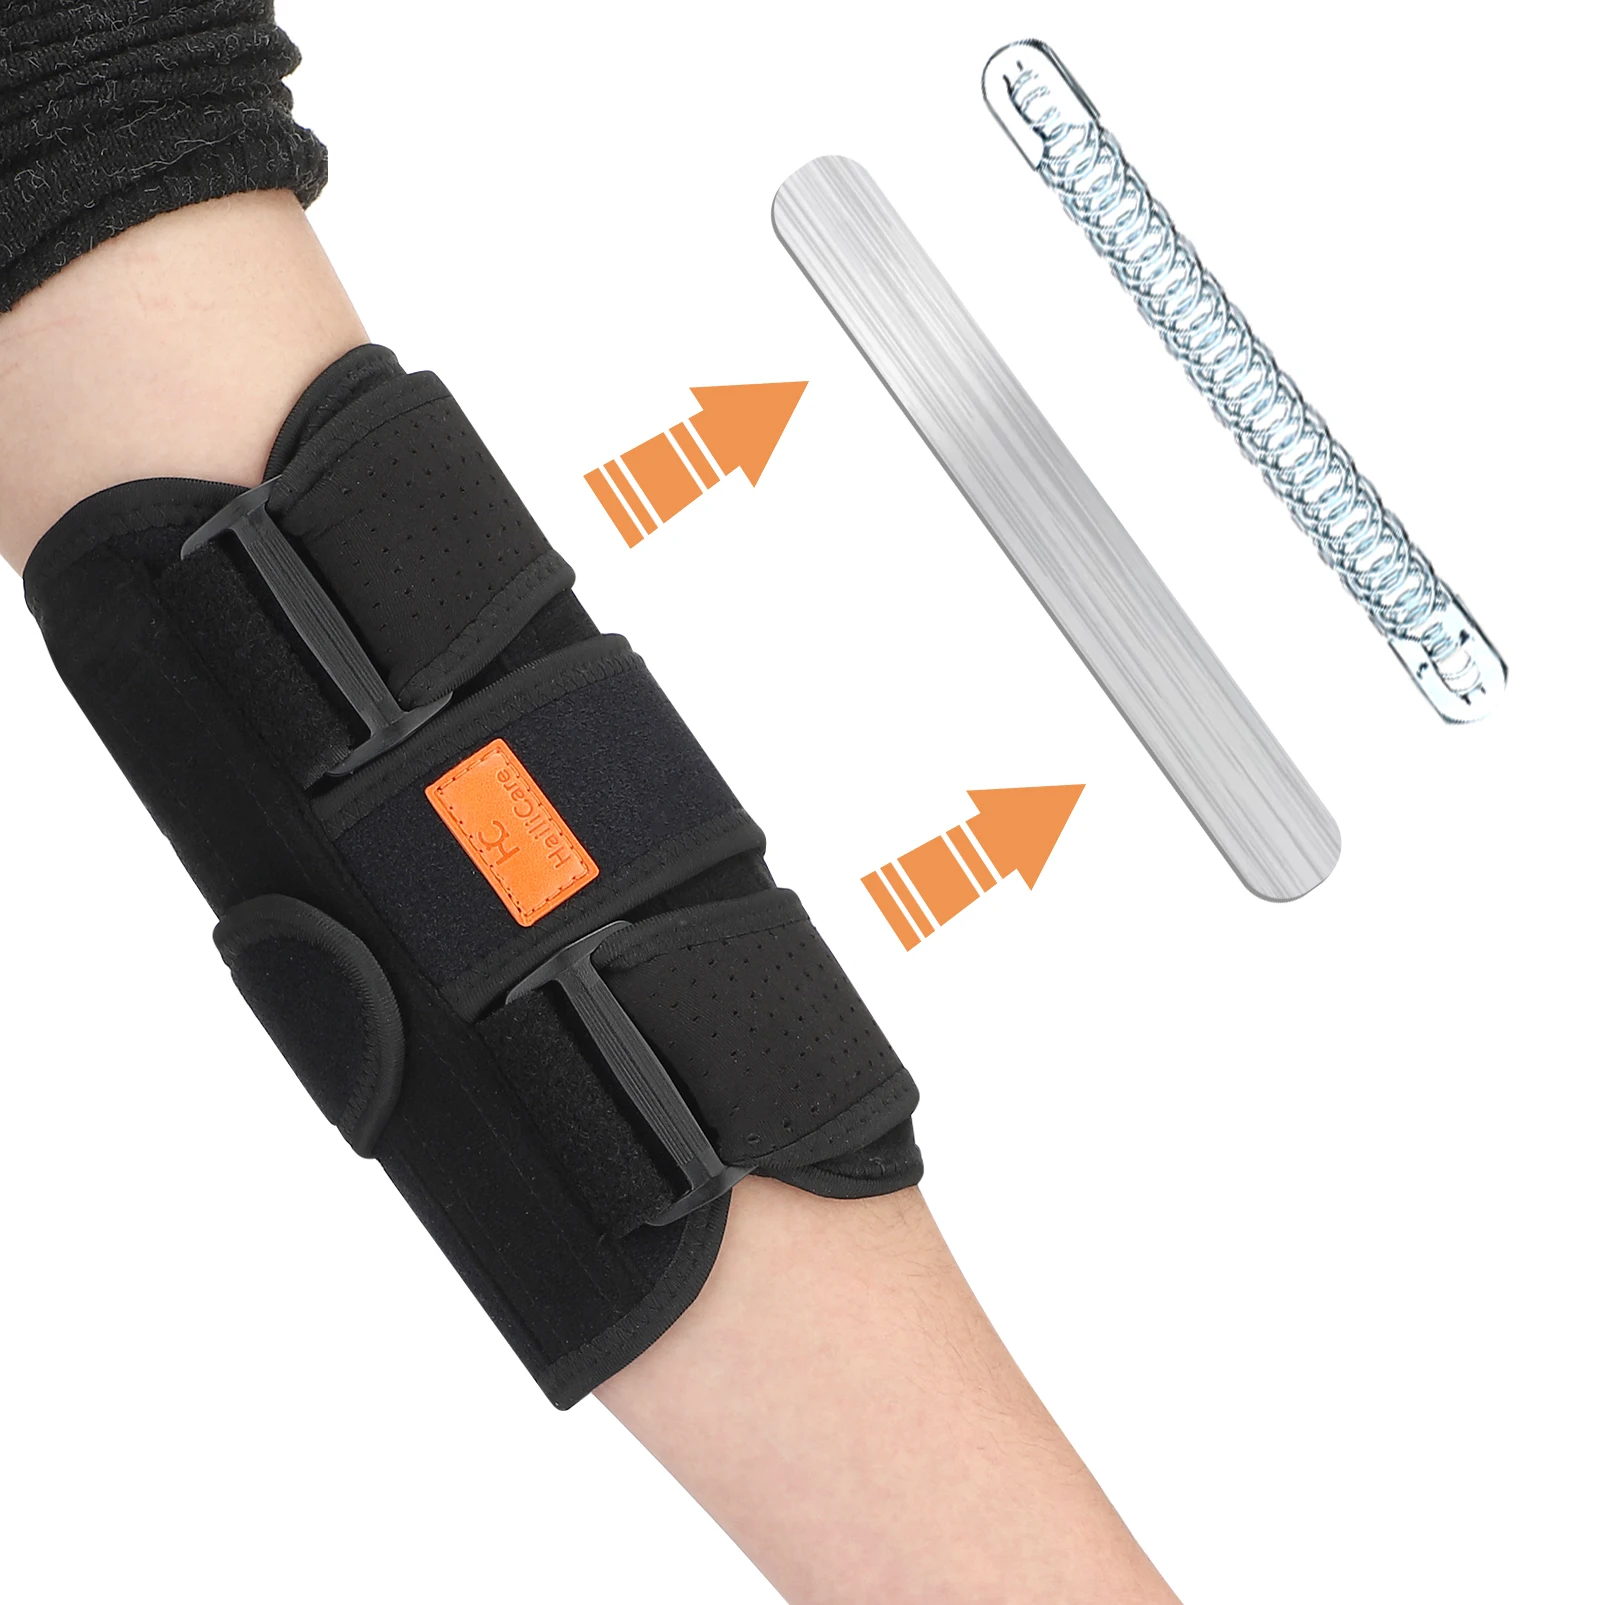 

Hand Elbow Support Braces Support Strap Upper Arm Splint Support Health Elbow Guard Fixed Joint Arthritis Fracture Stabilizer